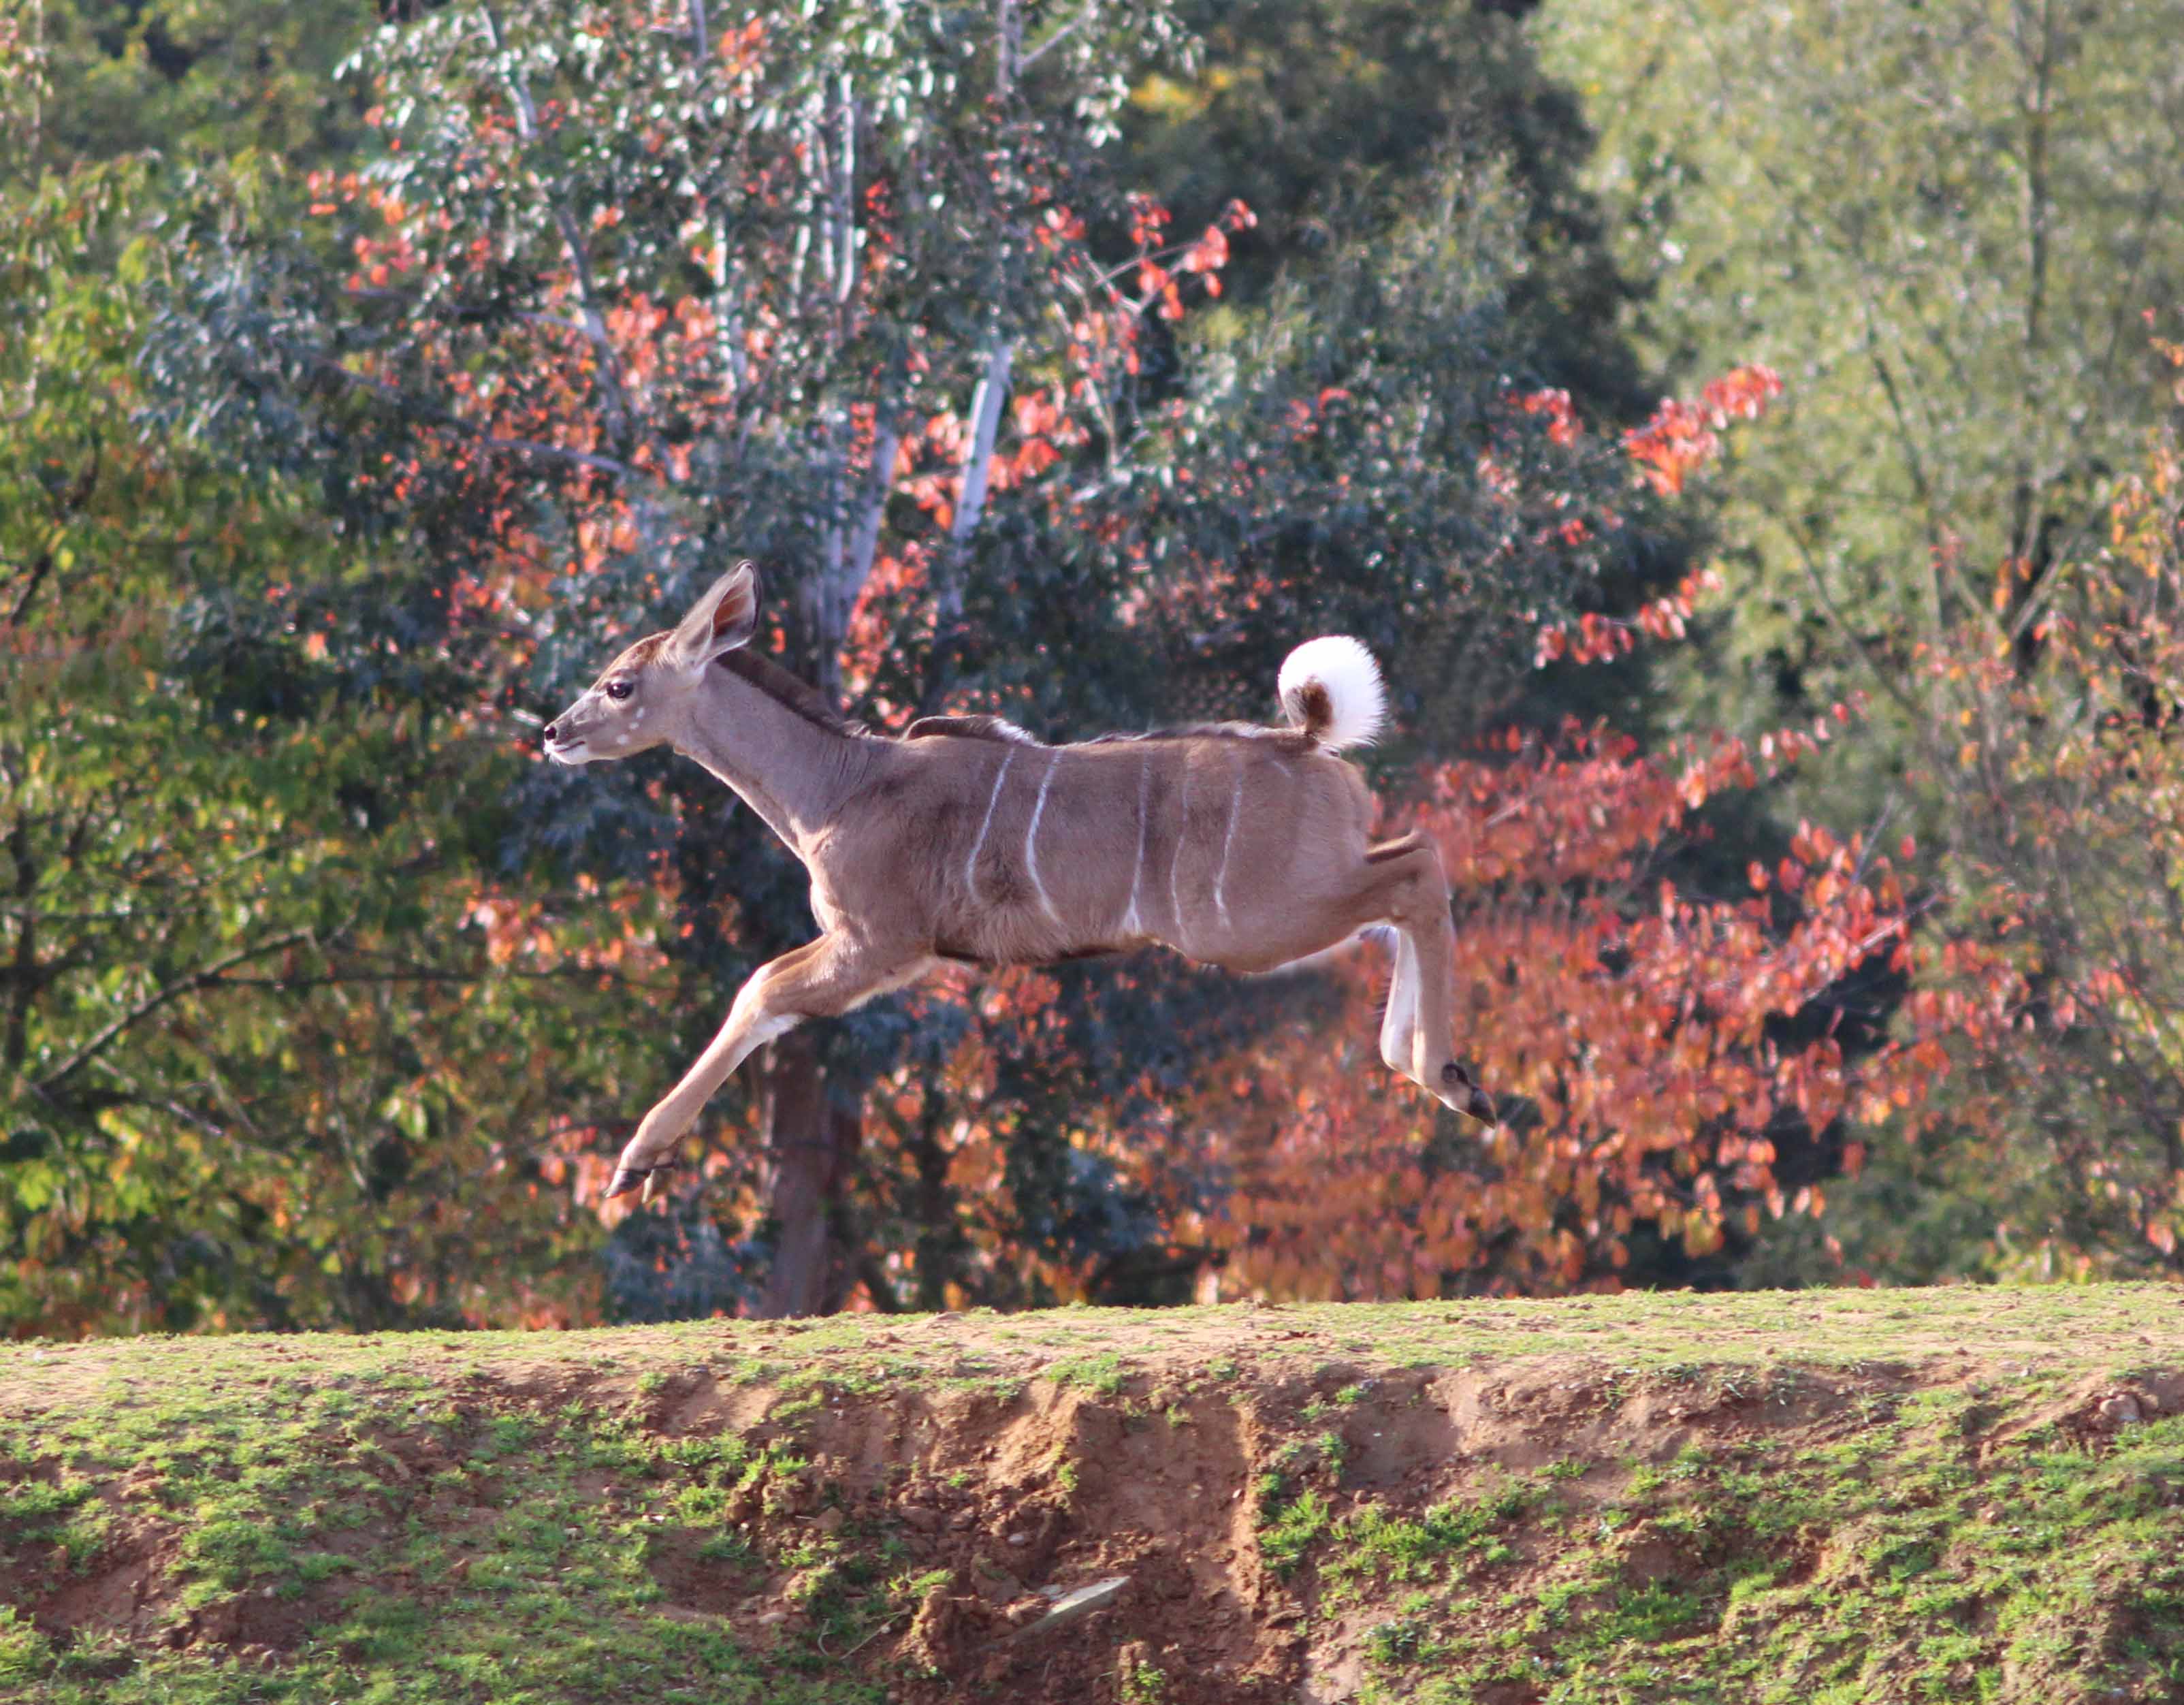 Our kudu calf has a spring in his step!